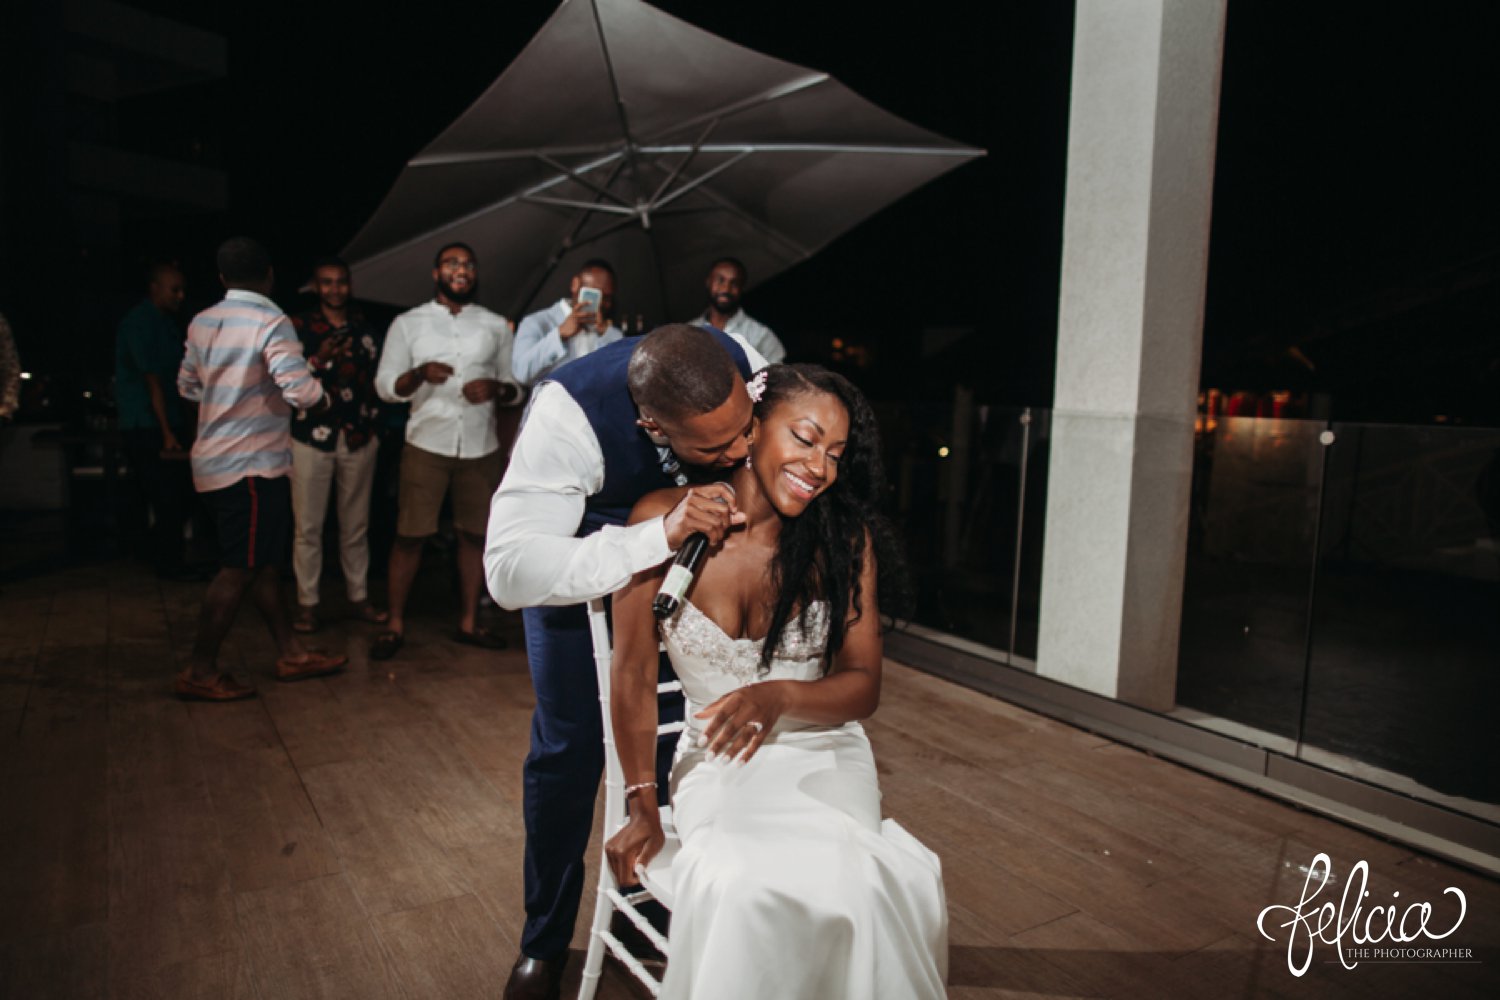   images by feliciathephotographer.com | destination wedding photographer | st lucia | l&s travel | the Royalton | reception | details | groom serenading bride | throwing the garter | white fitted gown | navy suit | 